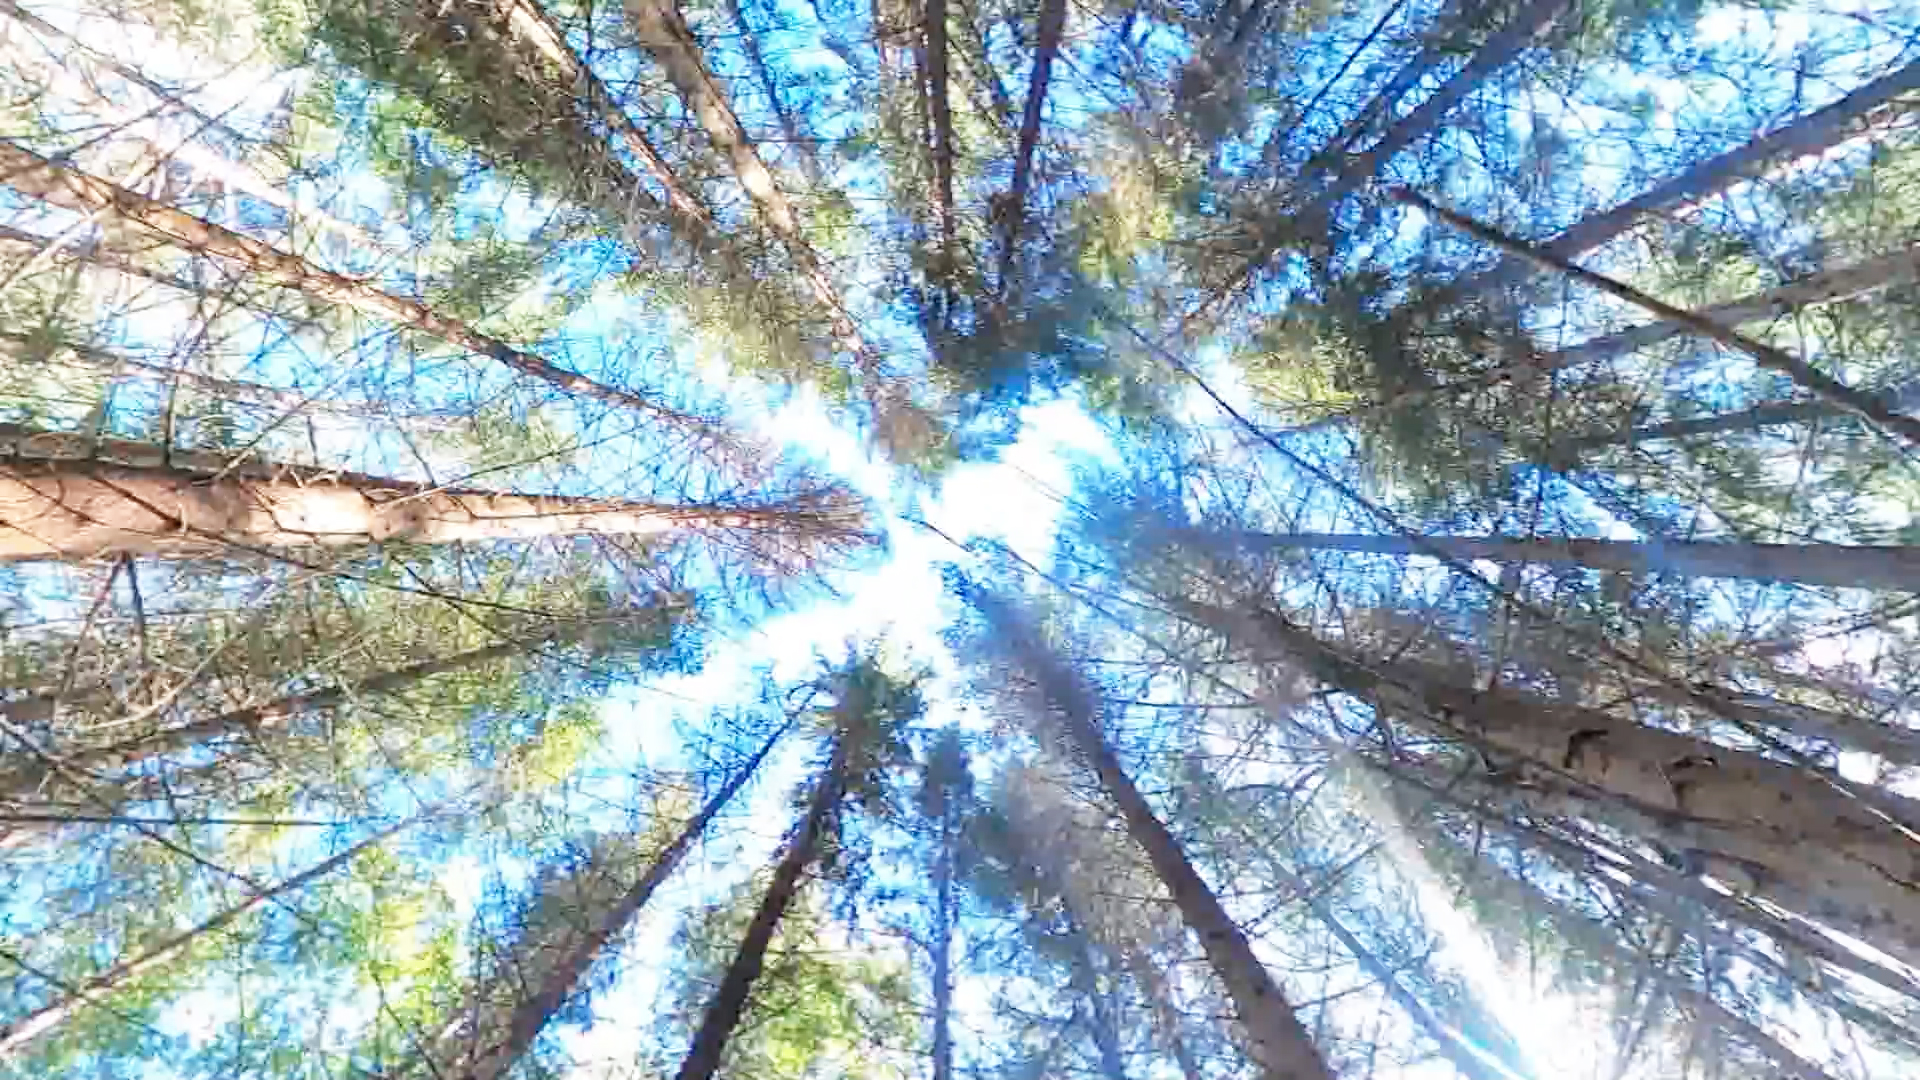 Image of trees in a forest seen from below